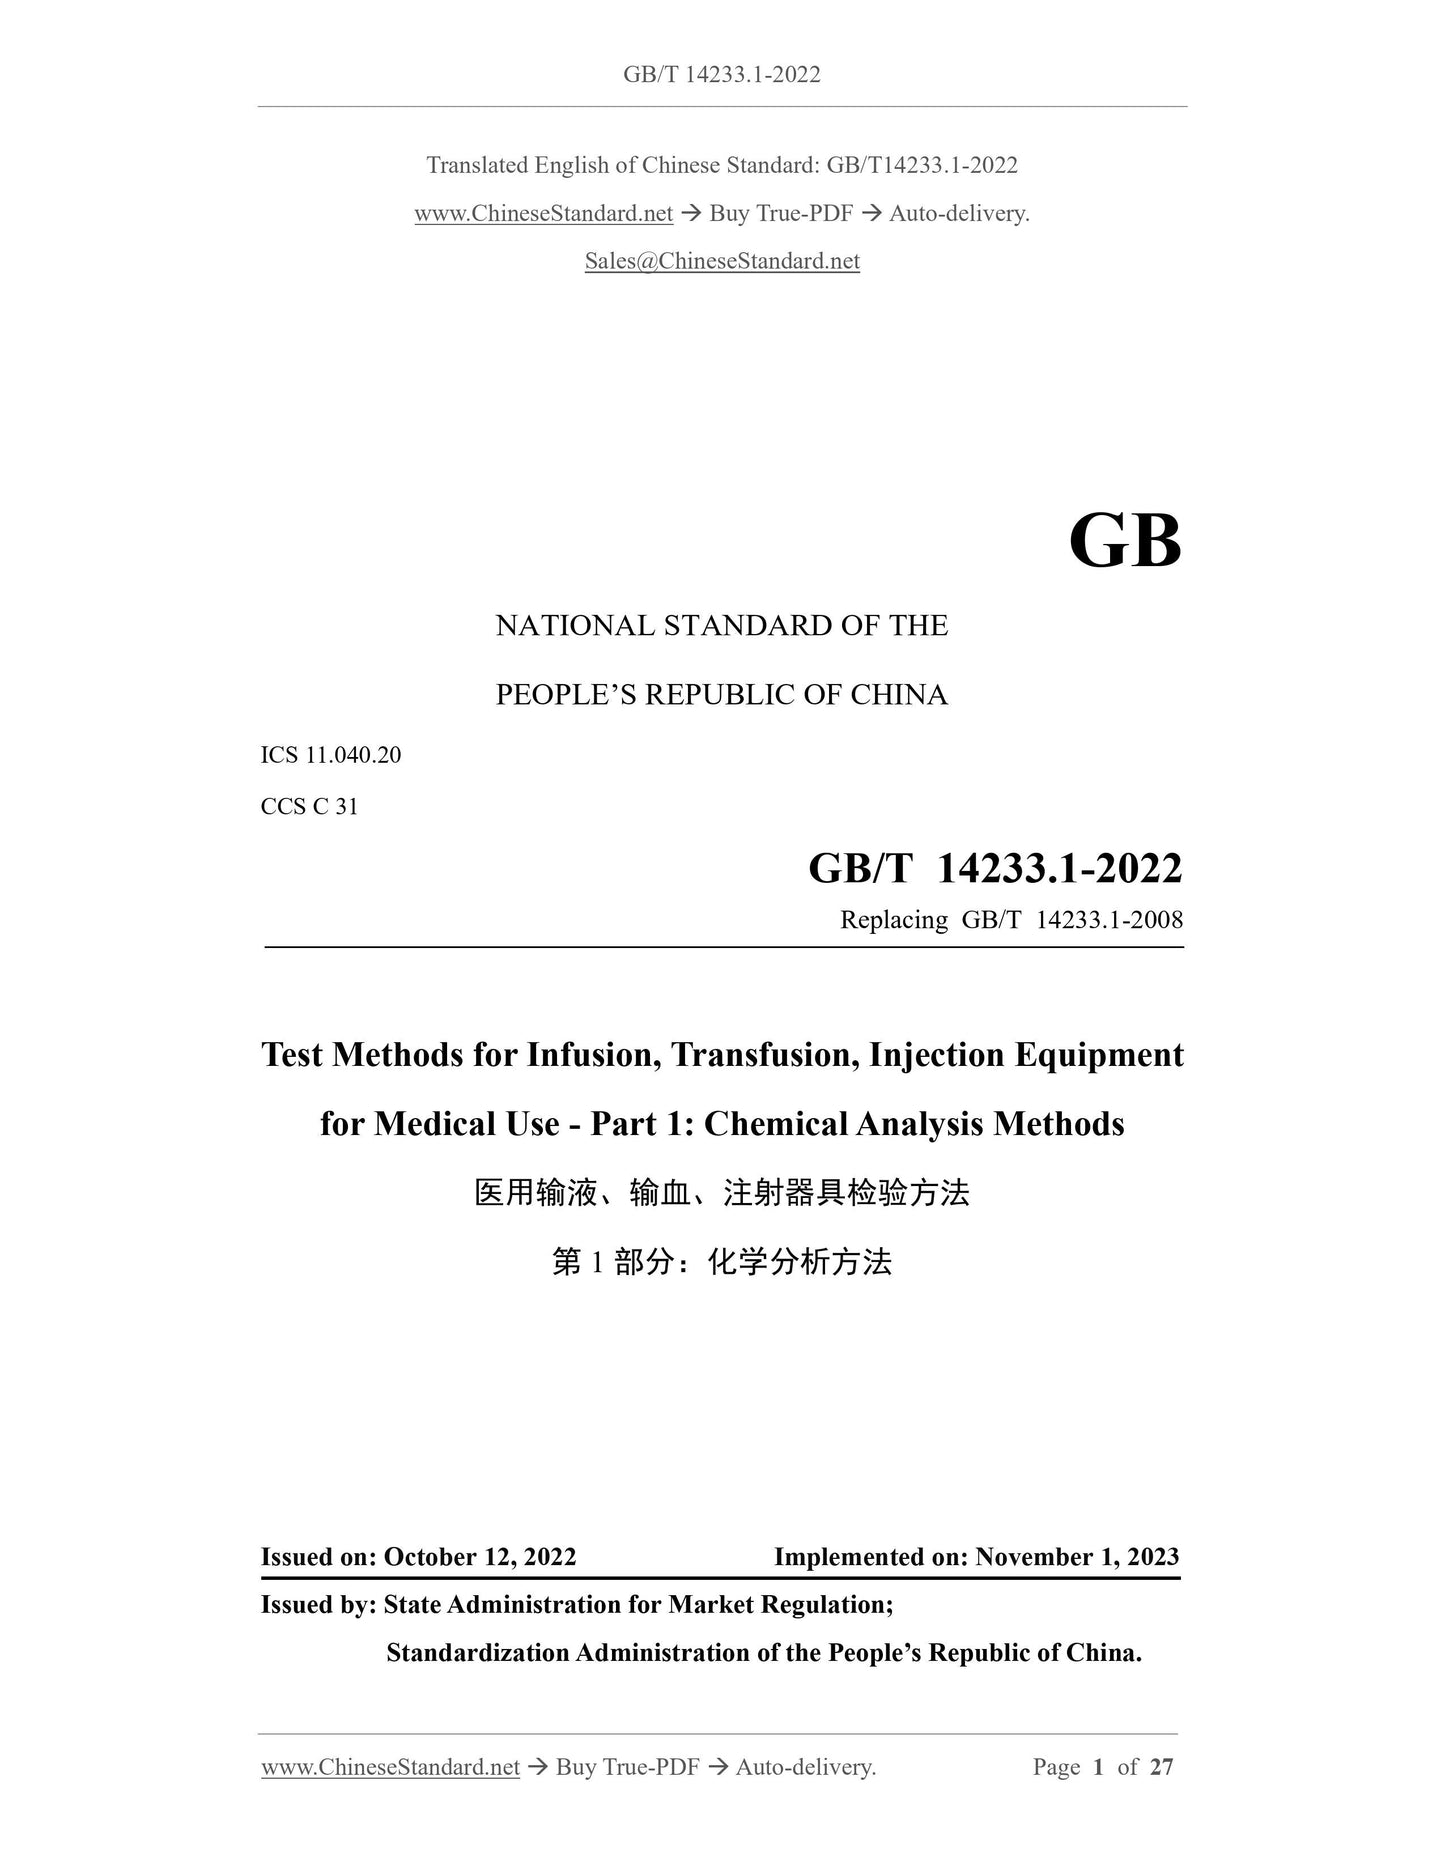 GB/T 14233.1-2022 Page 1